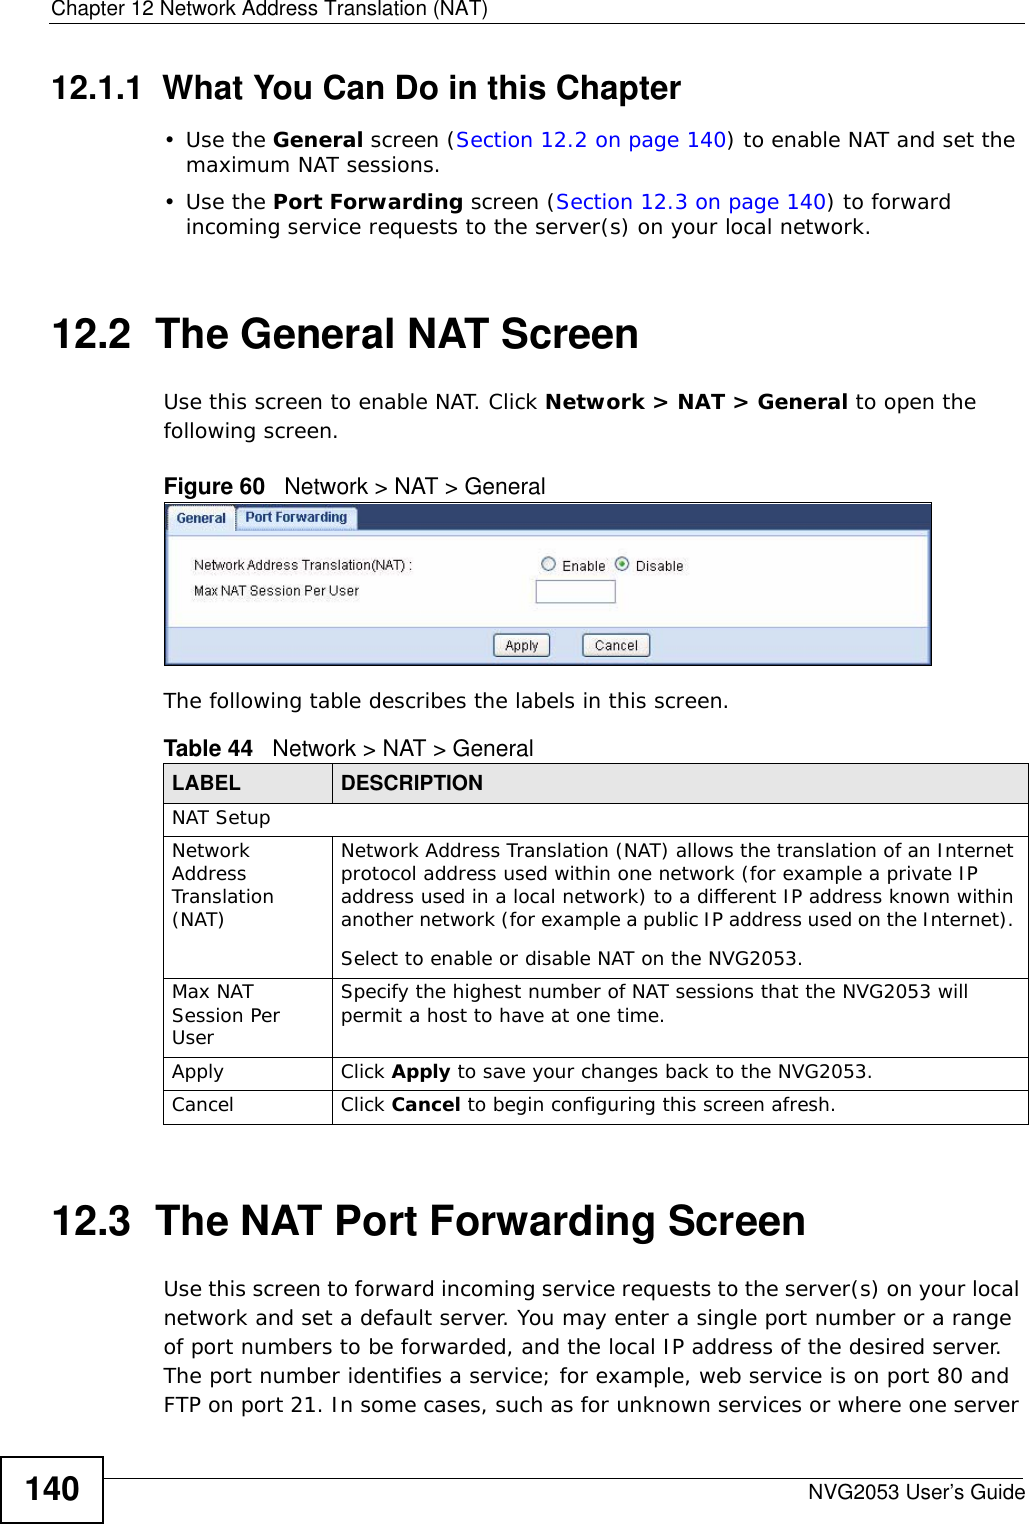 Chapter 12 Network Address Translation (NAT)NVG2053 User’s Guide14012.1.1  What You Can Do in this Chapter•Use the General screen (Section 12.2 on page 140) to enable NAT and set the maximum NAT sessions.•Use the Port Forwarding screen (Section 12.3 on page 140) to forward incoming service requests to the server(s) on your local network.12.2  The General NAT ScreenUse this screen to enable NAT. Click Network &gt; NAT &gt; General to open the following screen.Figure 60   Network &gt; NAT &gt; General The following table describes the labels in this screen.12.3  The NAT Port Forwarding Screen   Use this screen to forward incoming service requests to the server(s) on your local network and set a default server. You may enter a single port number or a range of port numbers to be forwarded, and the local IP address of the desired server. The port number identifies a service; for example, web service is on port 80 and FTP on port 21. In some cases, such as for unknown services or where one server Table 44   Network &gt; NAT &gt; GeneralLABEL DESCRIPTIONNAT SetupNetwork Address Translation (NAT)Network Address Translation (NAT) allows the translation of an Internet protocol address used within one network (for example a private IP address used in a local network) to a different IP address known within another network (for example a public IP address used on the Internet). Select to enable or disable NAT on the NVG2053.Max NAT Session Per UserSpecify the highest number of NAT sessions that the NVG2053 will permit a host to have at one time.Apply Click Apply to save your changes back to the NVG2053.Cancel Click Cancel to begin configuring this screen afresh.